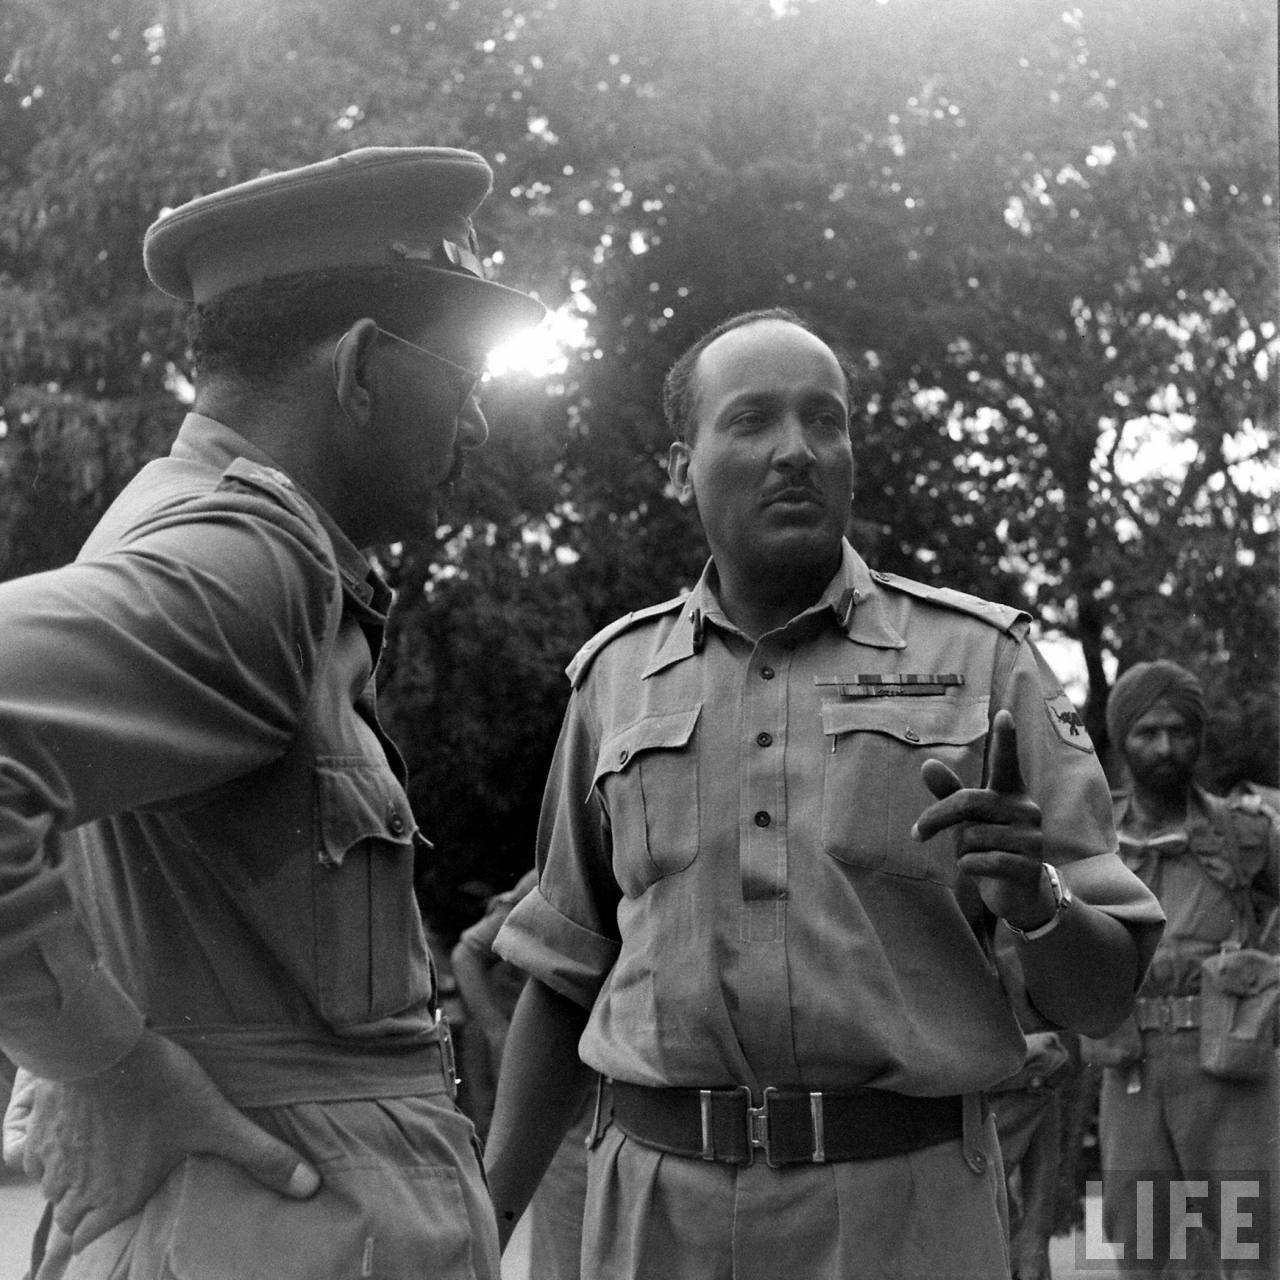 Major General Joyanto Nath Chaudhuri talking with Major General Syed Ahmed El Edroos, Commander-in-Chief of the Hyderabad State Forces | Operation Polo | Hyderabad Police Action | Annexation of Hyderabad, Hyderabad (Deccan), Telangana, India | Rare & Old Vintage Photos of Operation Polo, Hyderabad (Deccan), Telangana, India (1948)